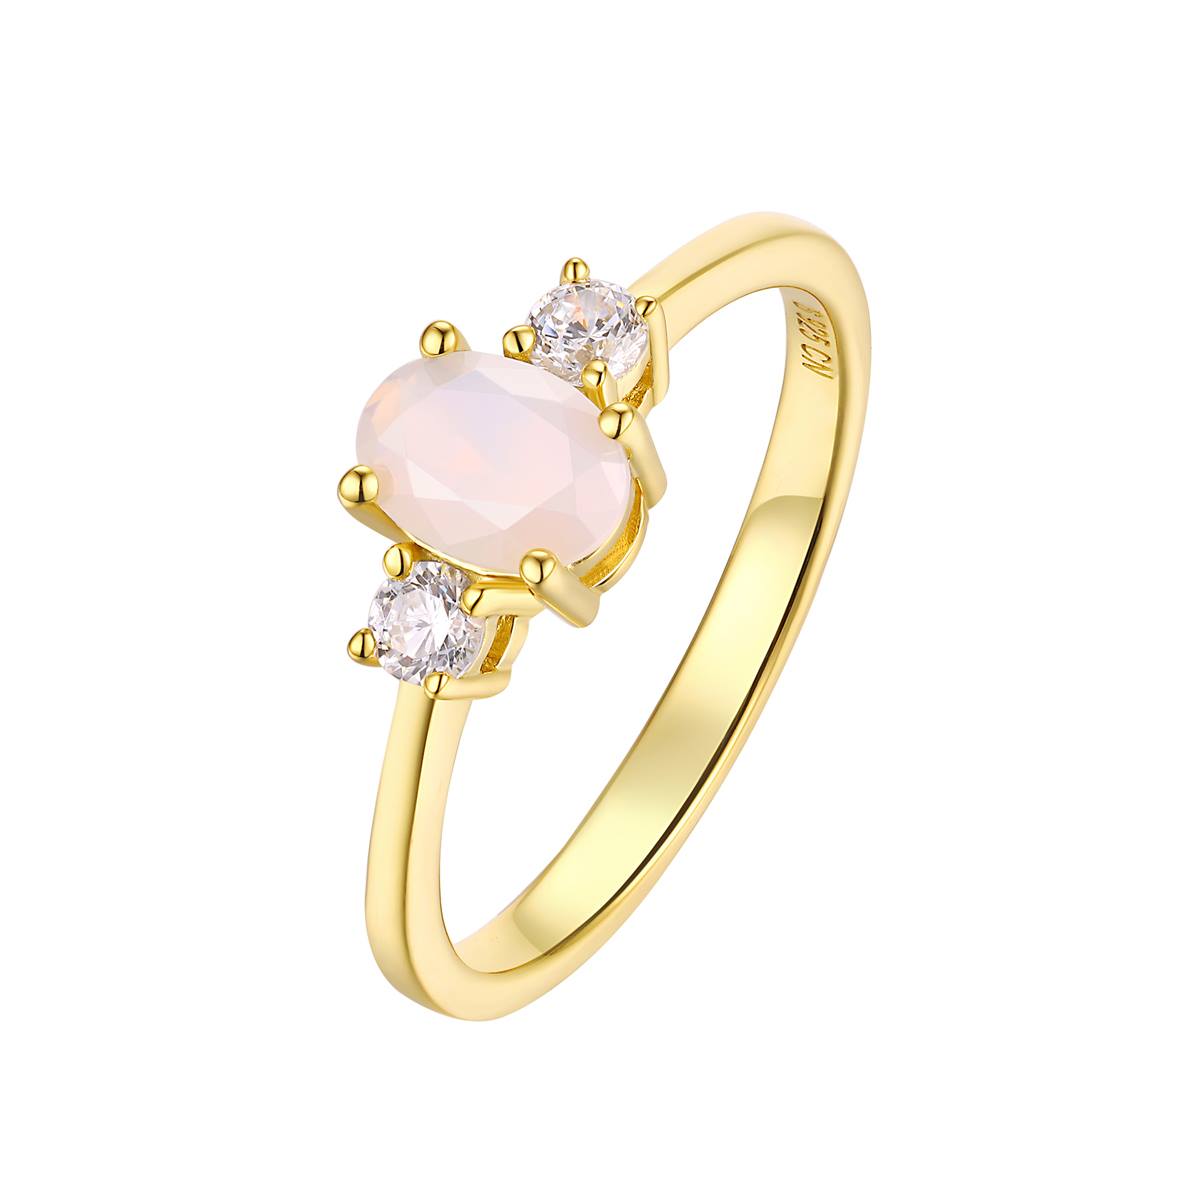 October Birthstone Simulated Opal & CZ Ring